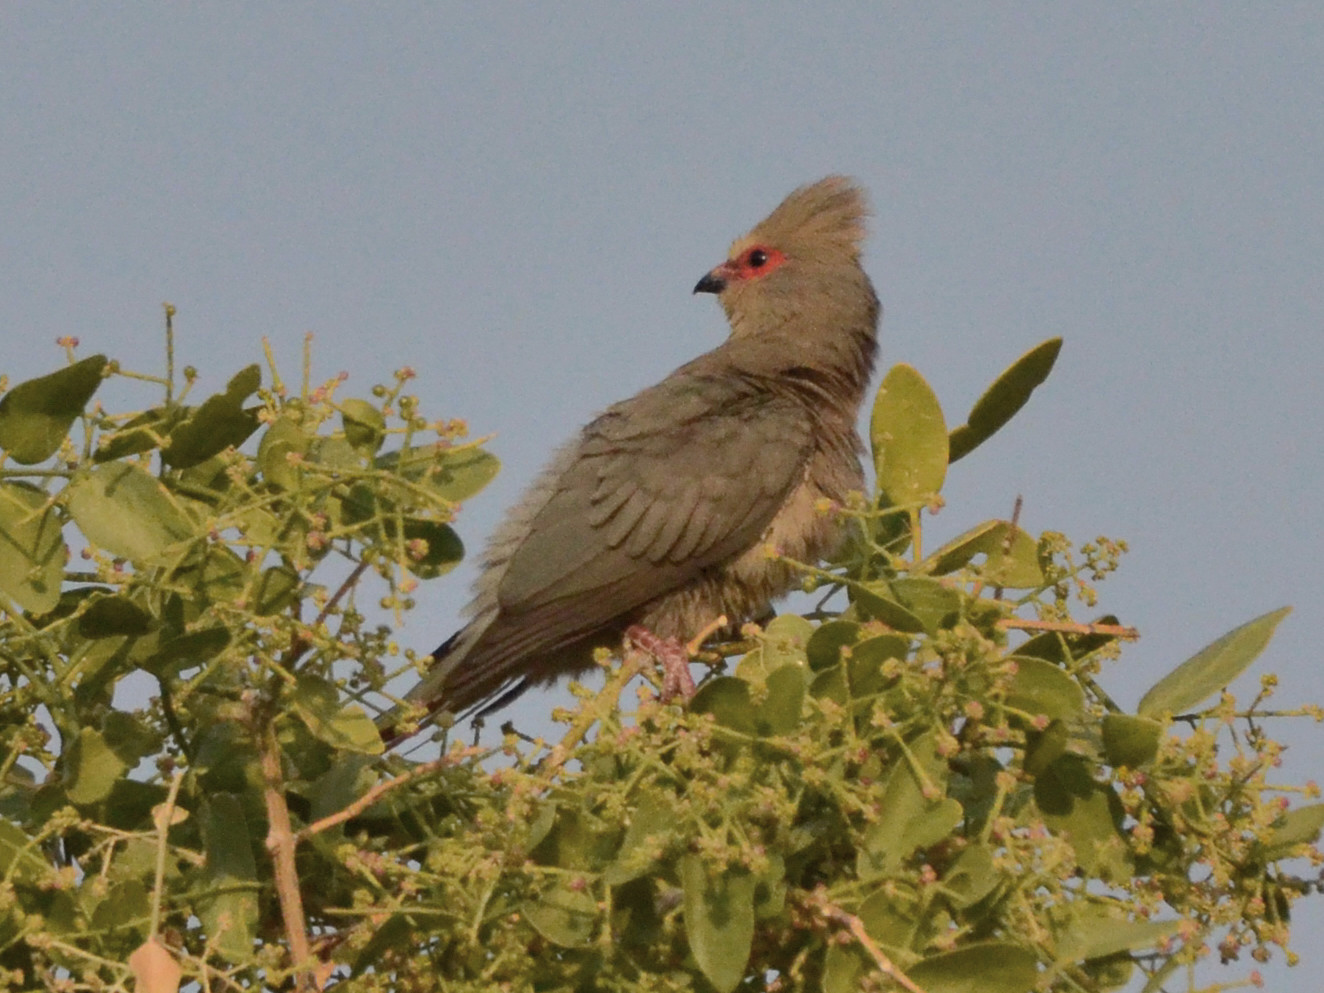 Click picture to see more Red-faced Mousebirds.